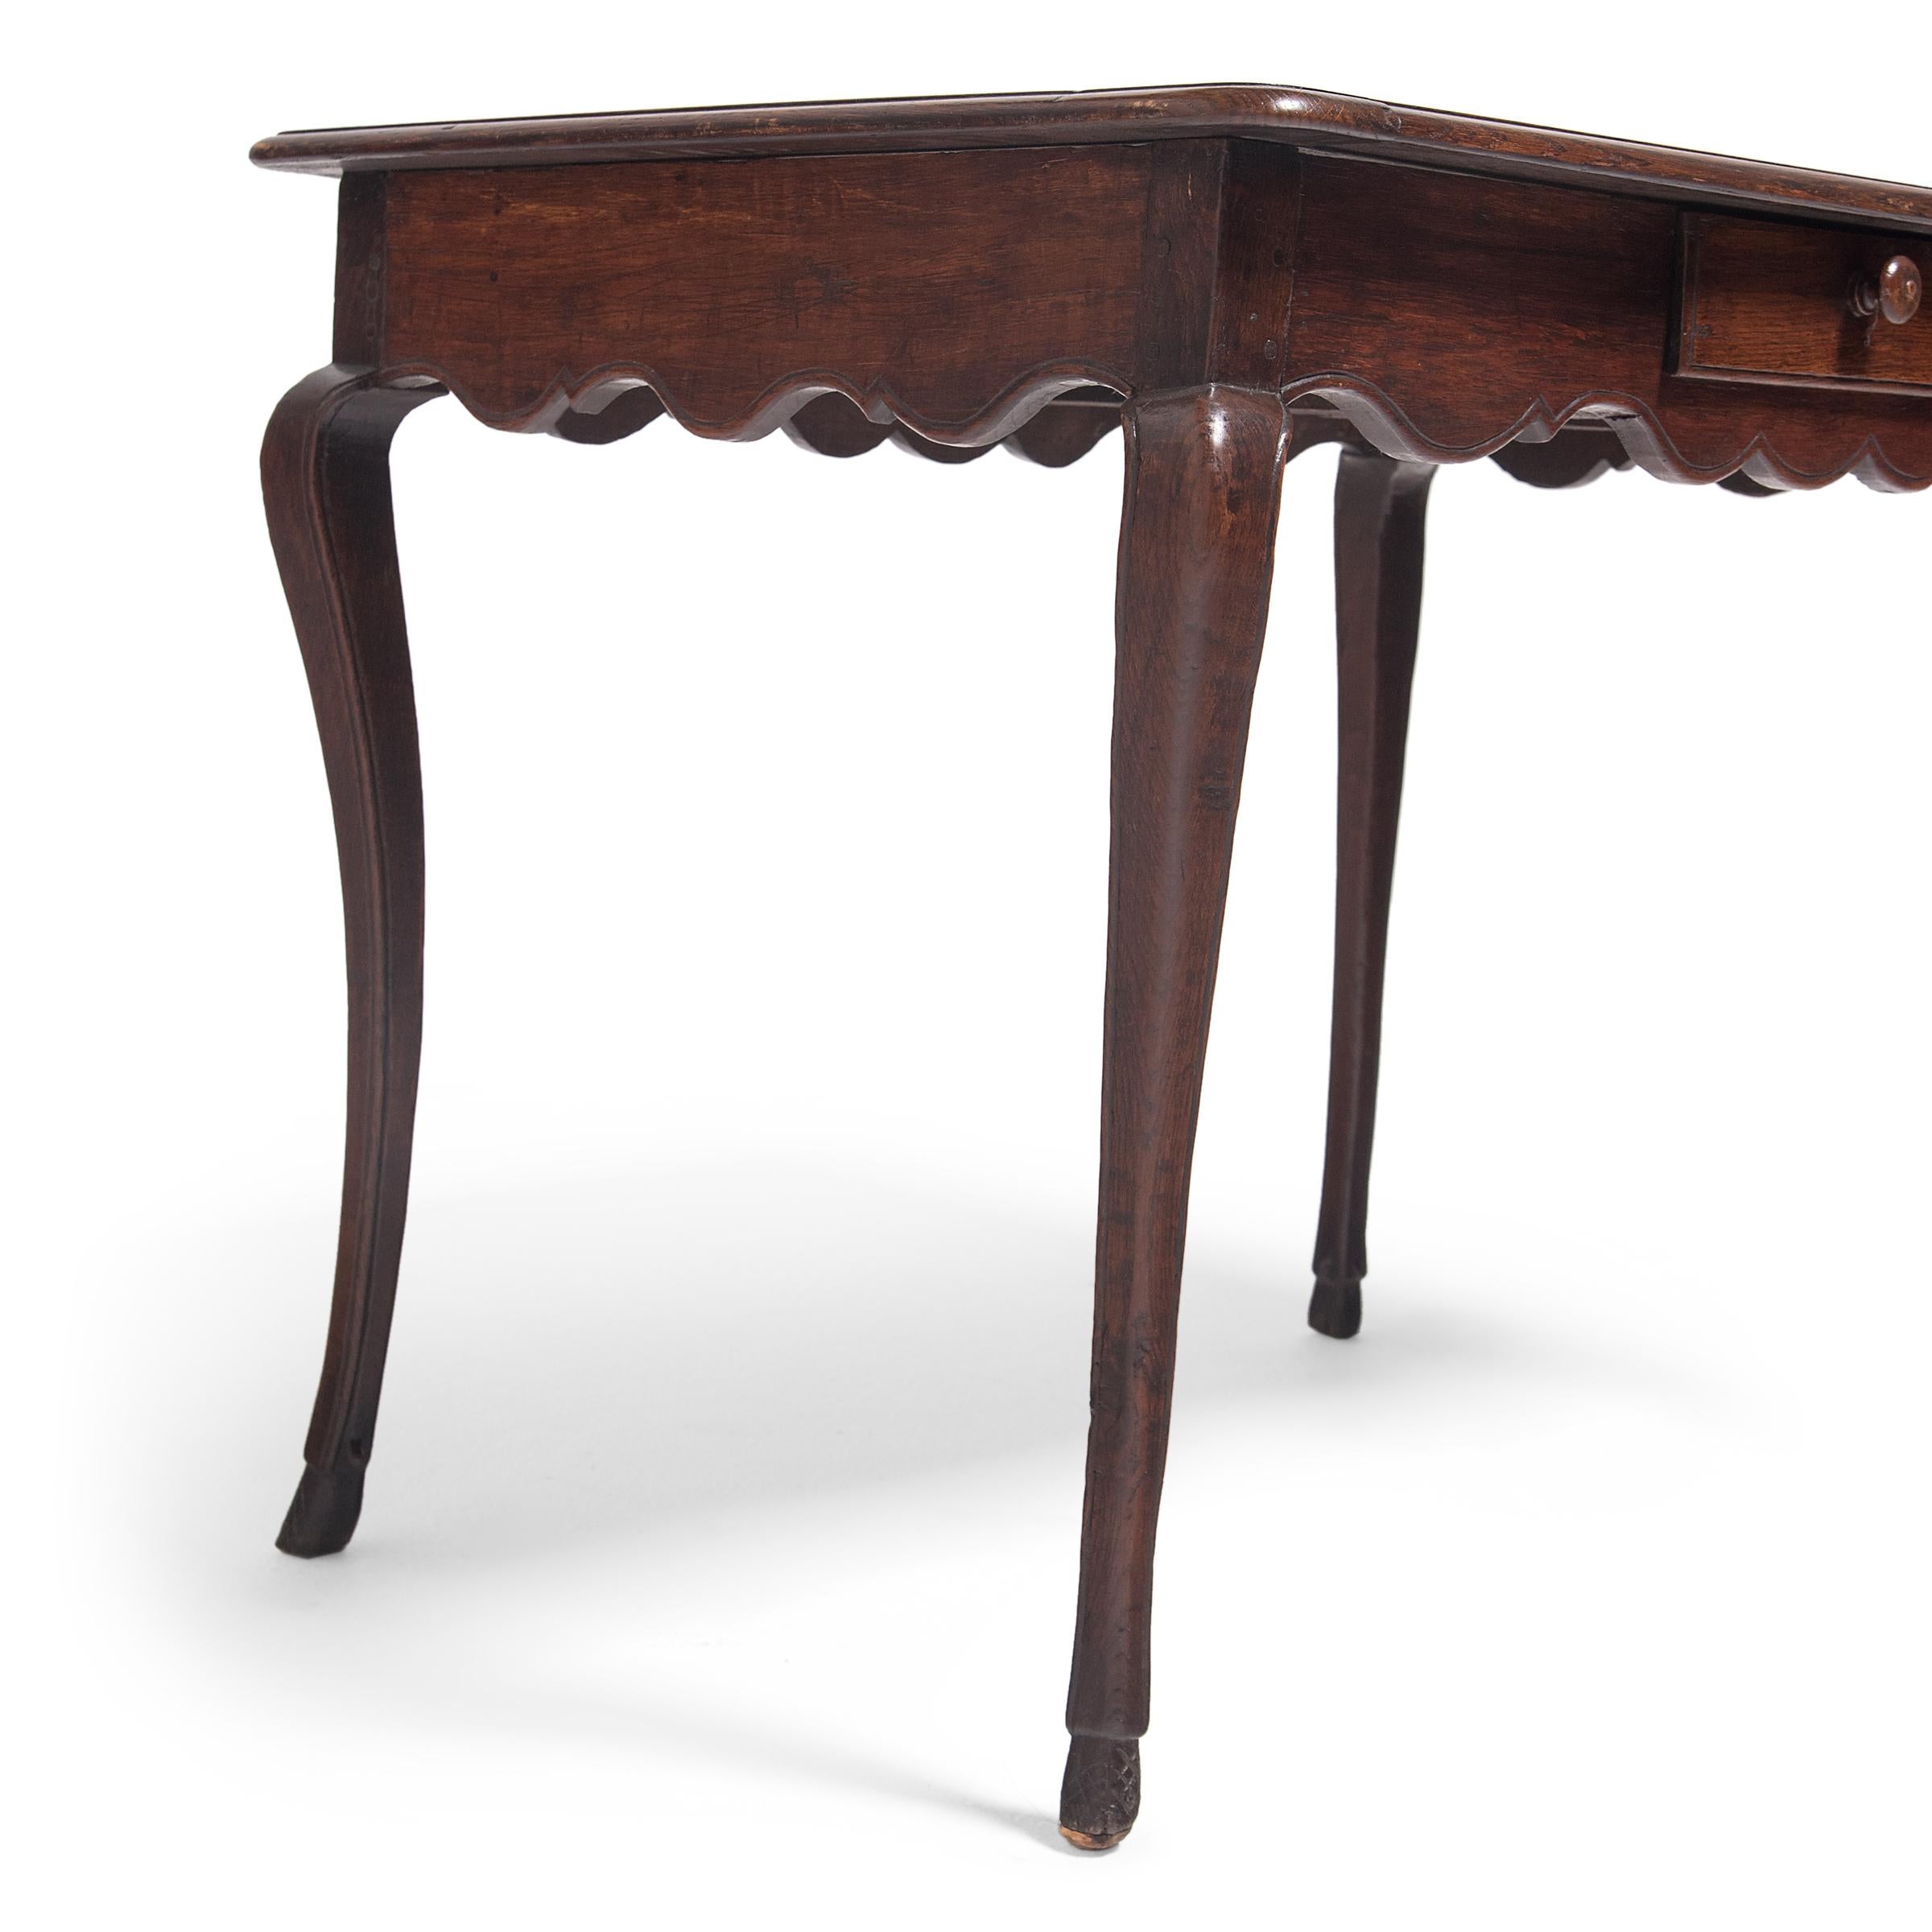 Fruitwood Provincial French Tea Table with Drawer, c. 1900 For Sale